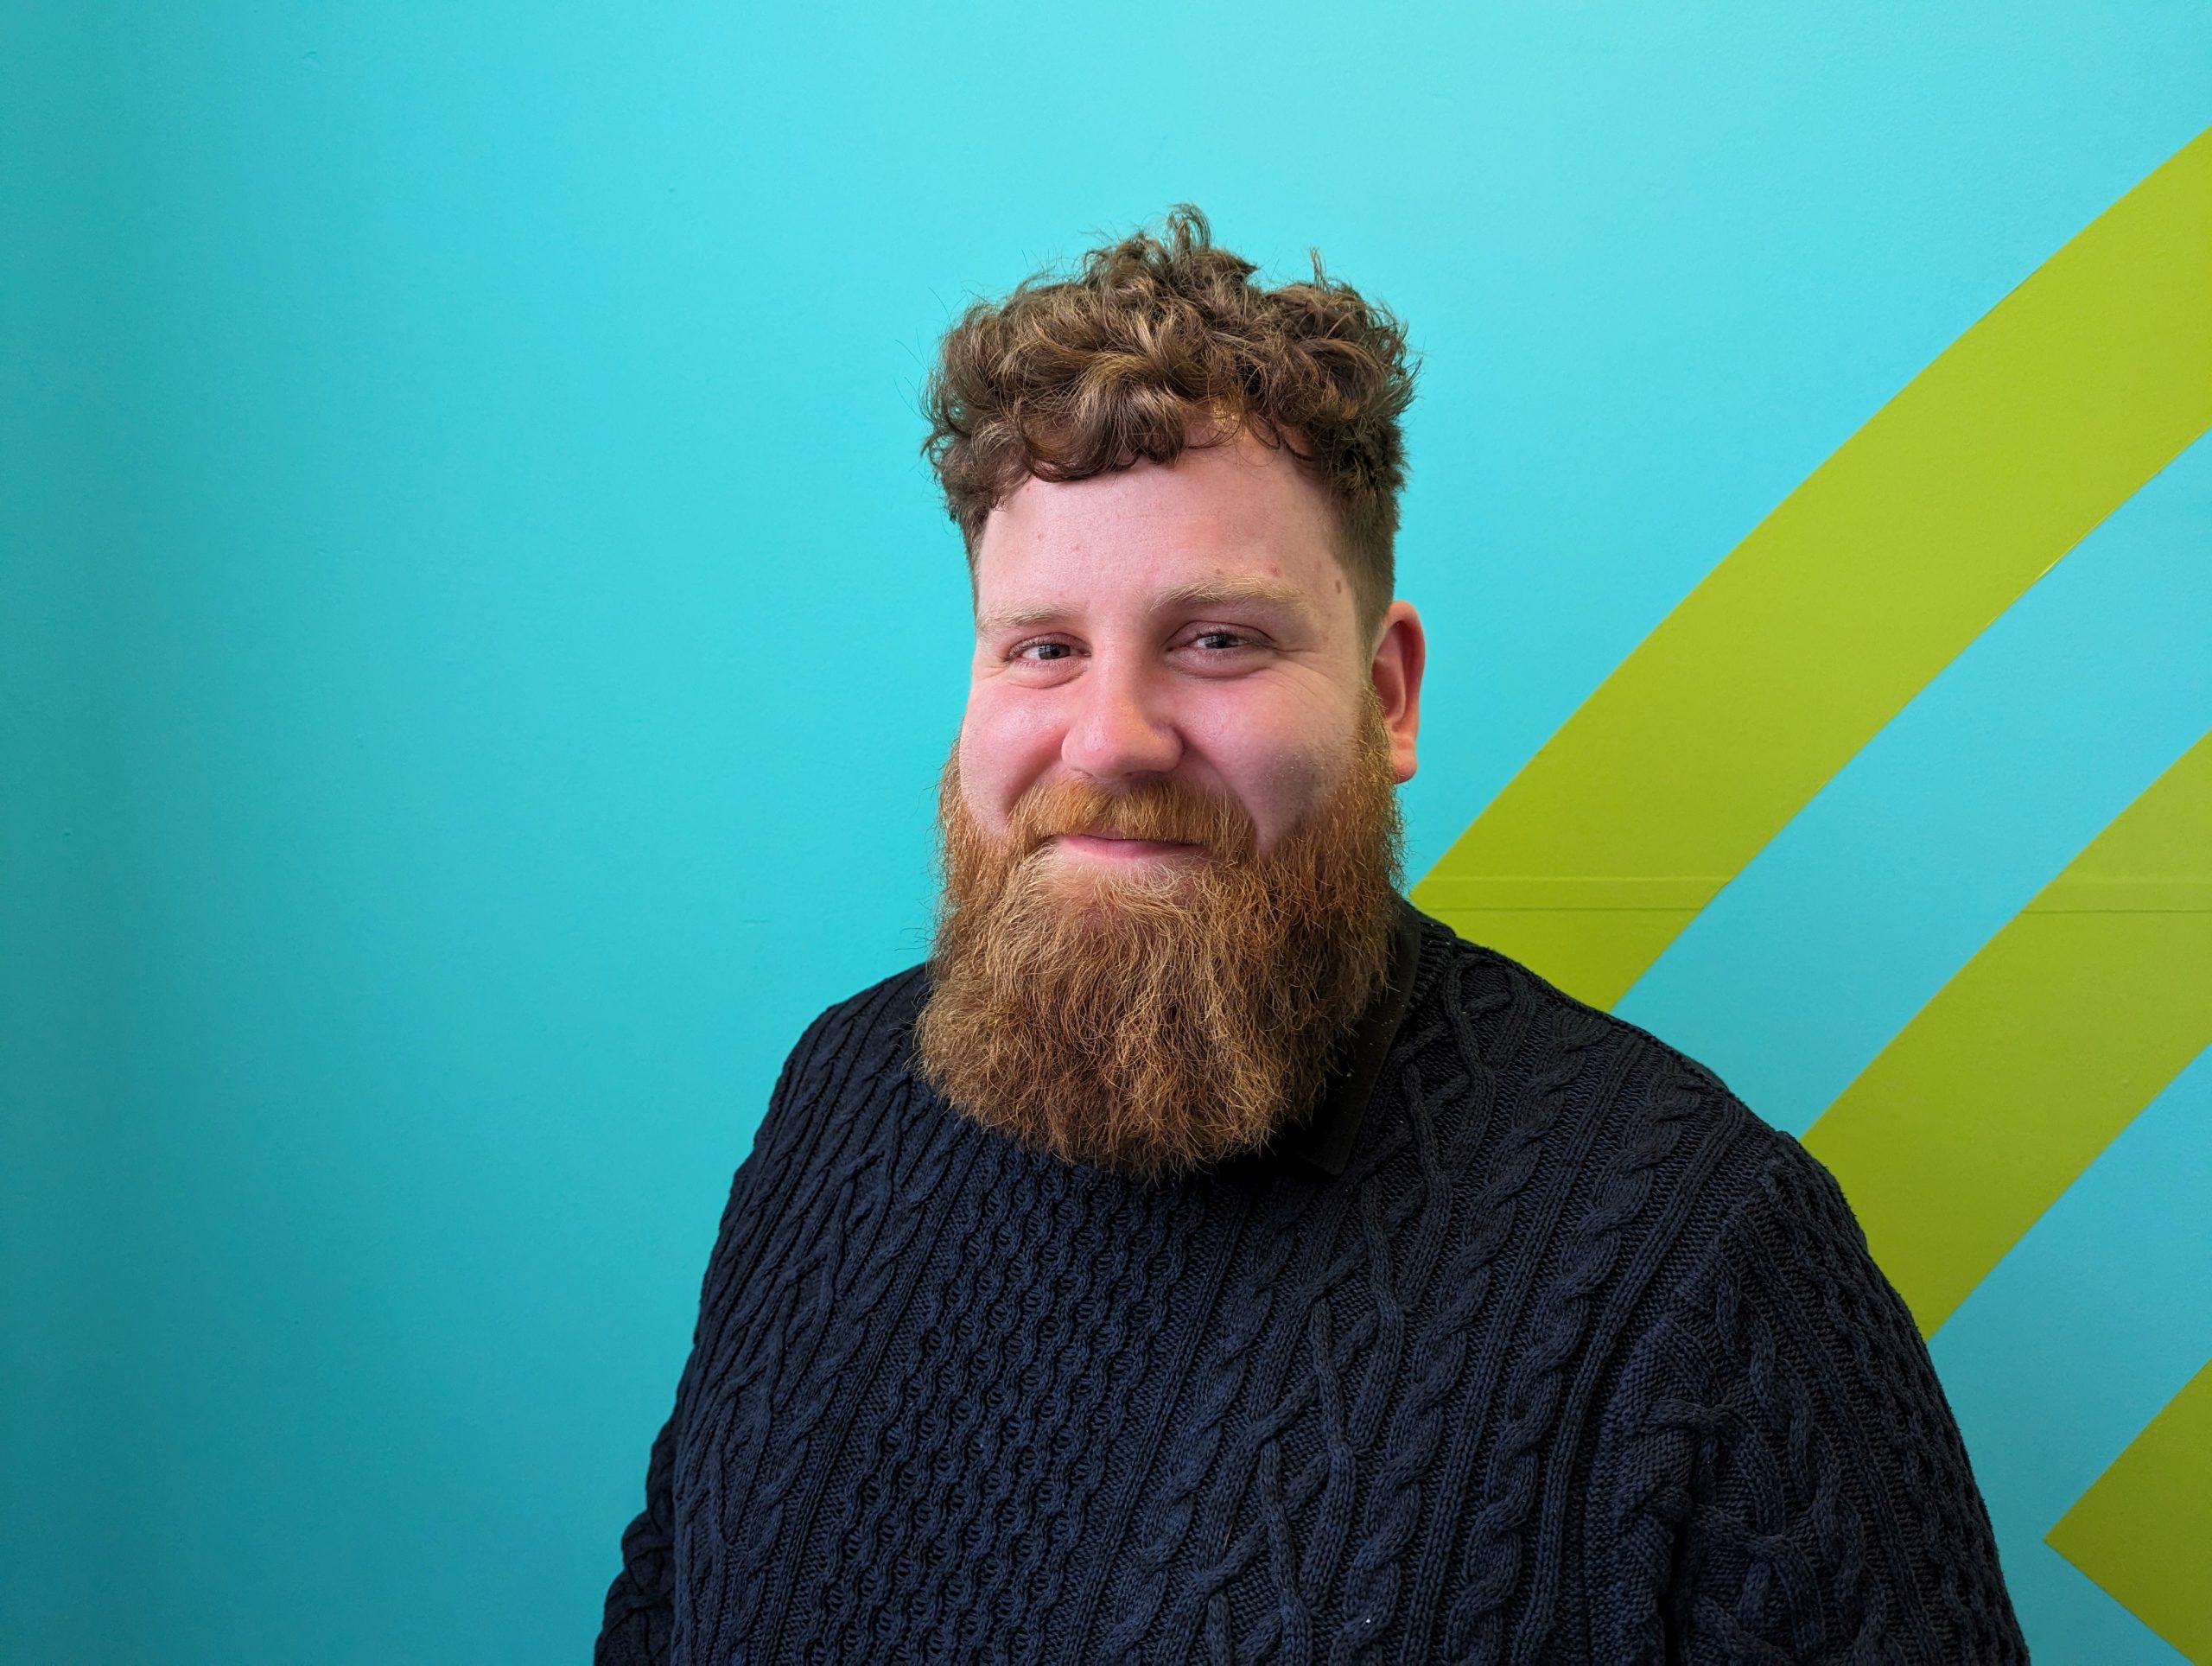 Headshot of Callum Lancashire, Engagement Manager for Scotland. Callum is standing again a turquoise blue background with three yellow strips in the right hand corner. He is wearing a chunky, navy jumper and is turning towards the camera, smiling.